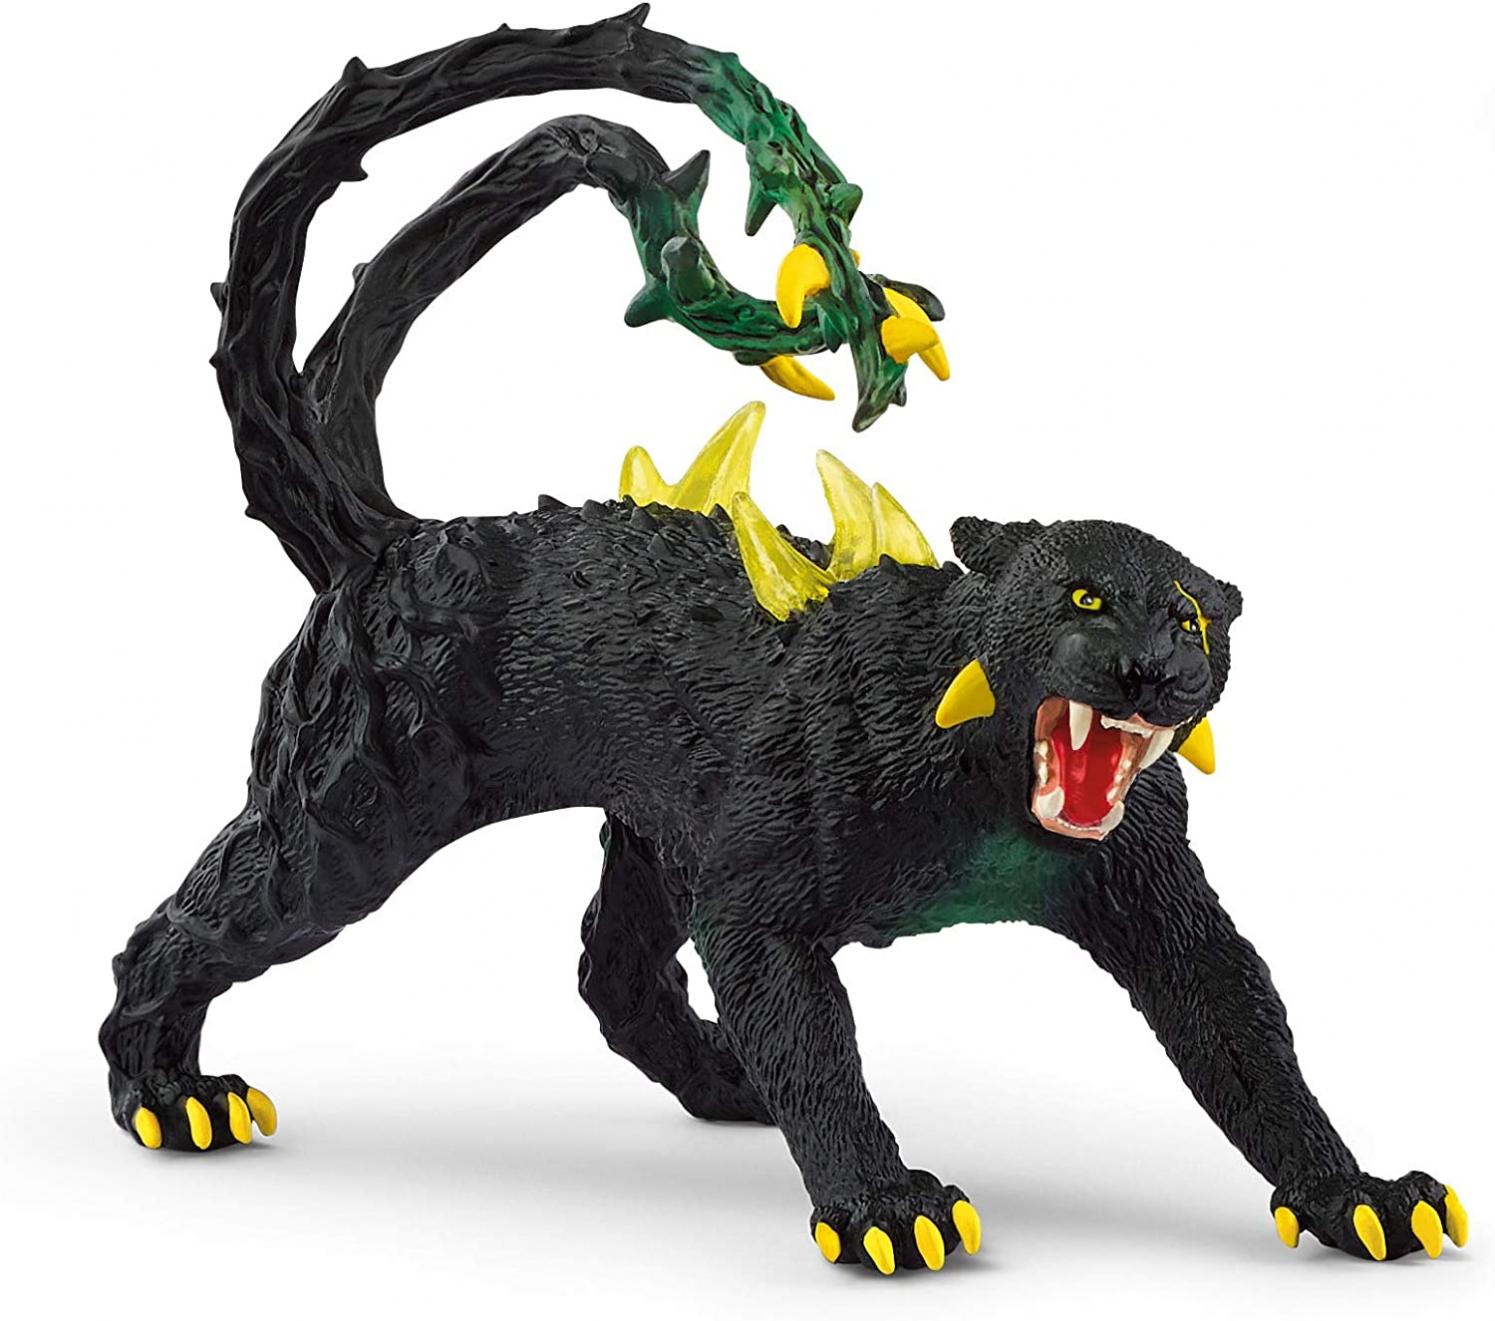 Schleich Eldrador Creatures, Mythical Creatures Toys for Kids, Shadow Panther Action Figure, Ages 7+